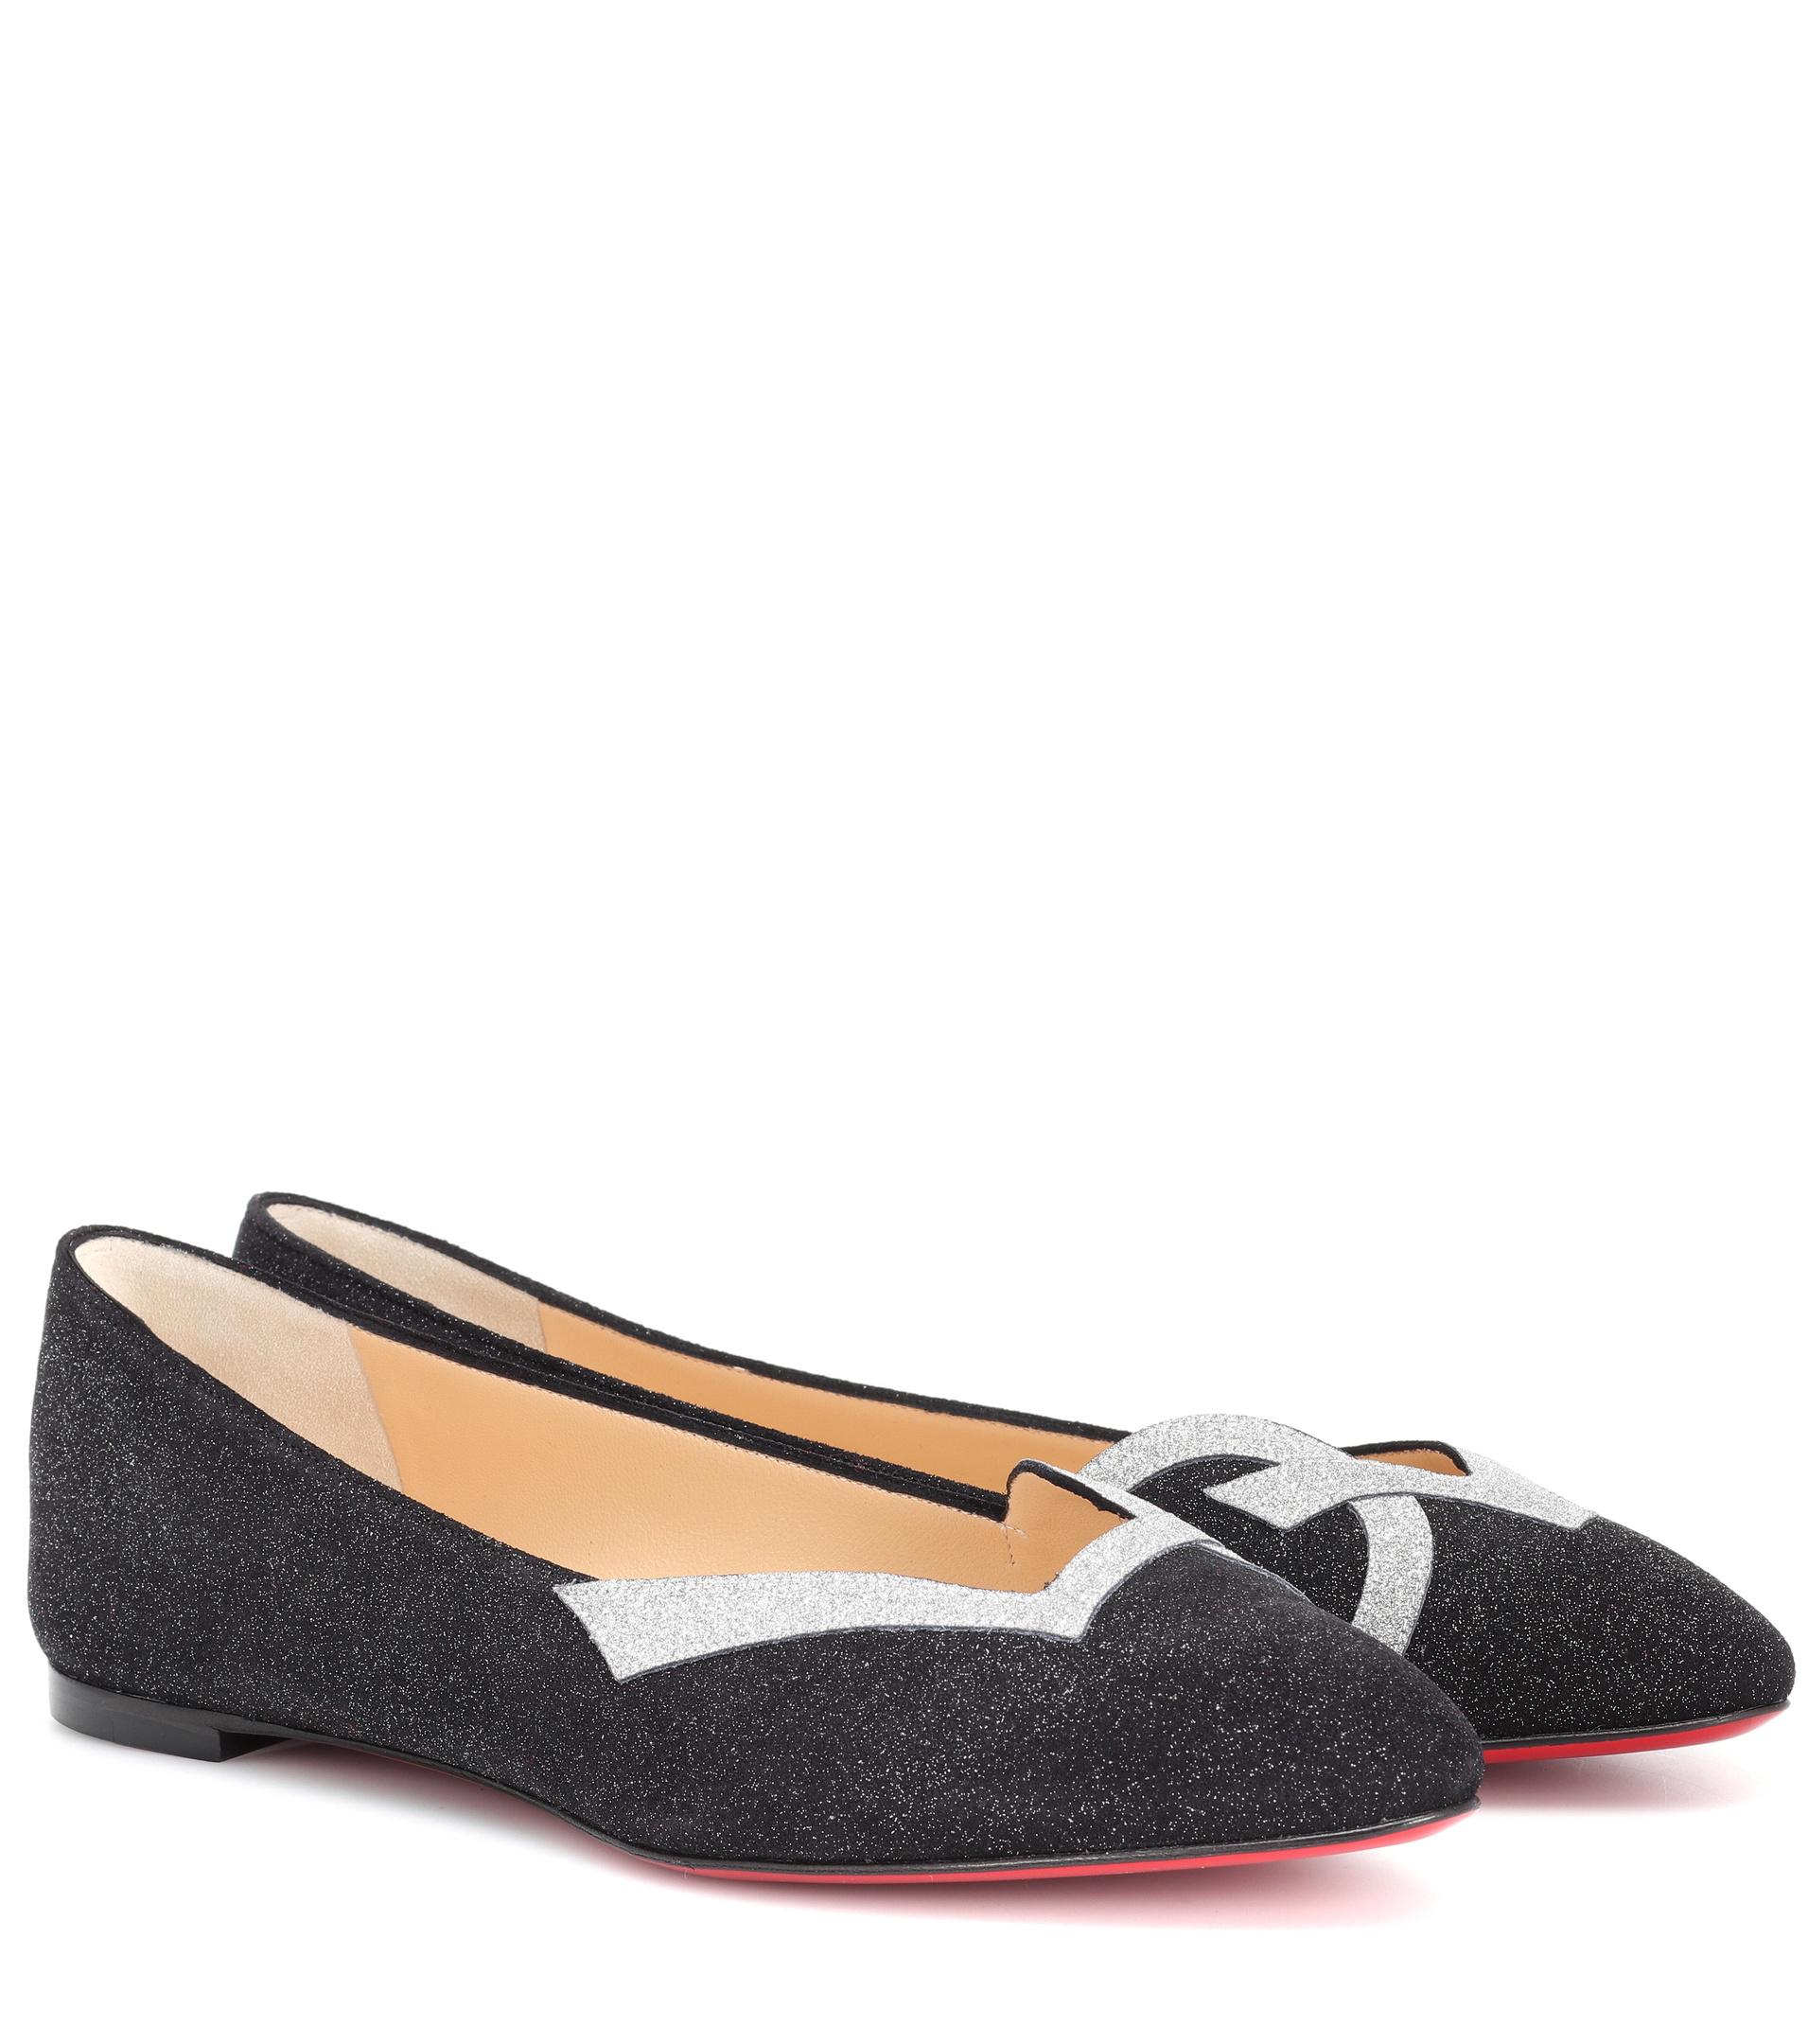 Christian Louboutin Love 2018 Suede Ballet Flats in Black - Lyst